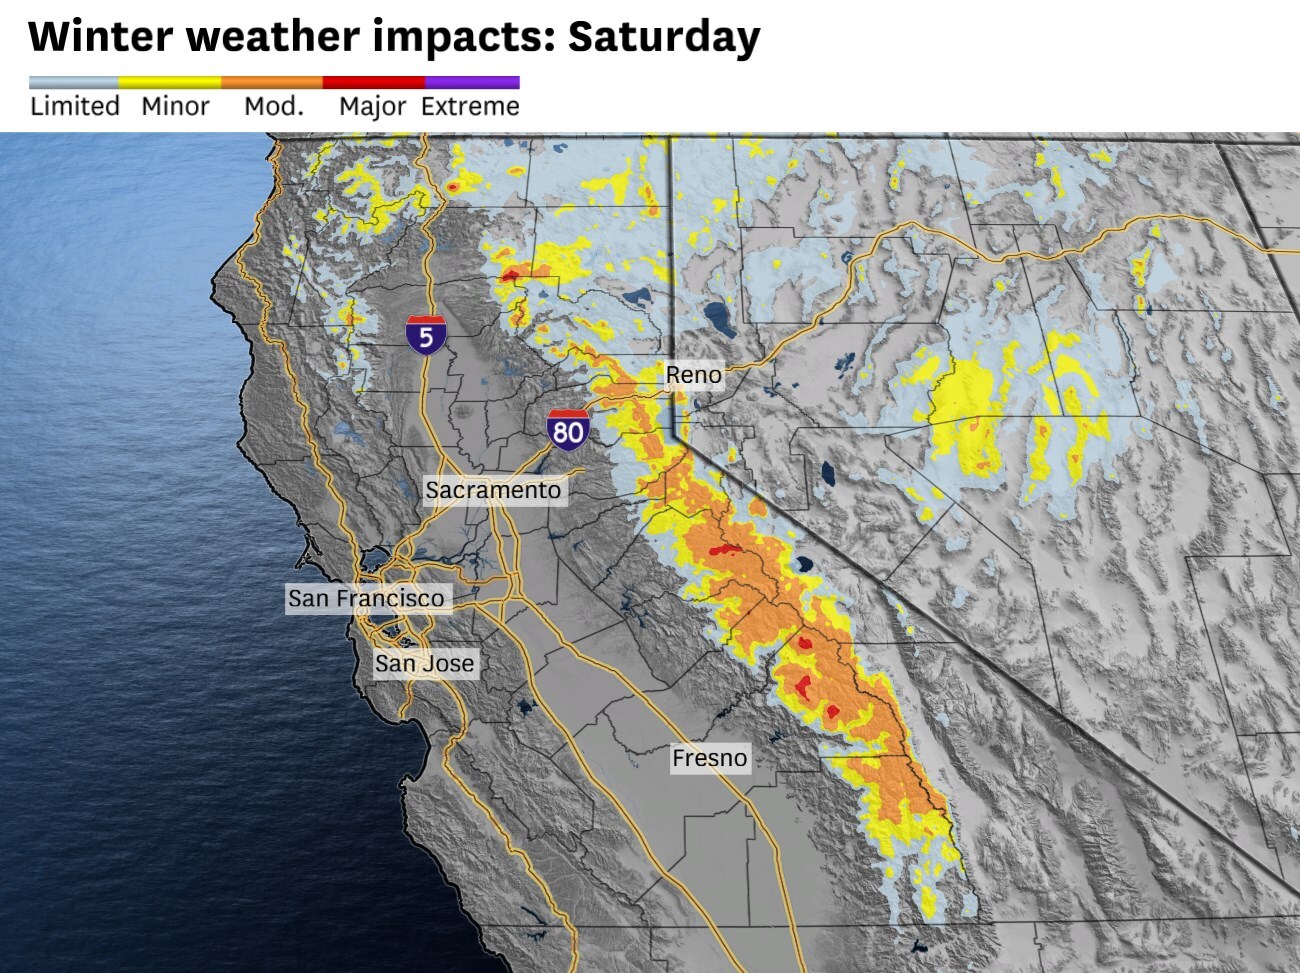 Sierra winter weather advisory issued ahead of spring storm